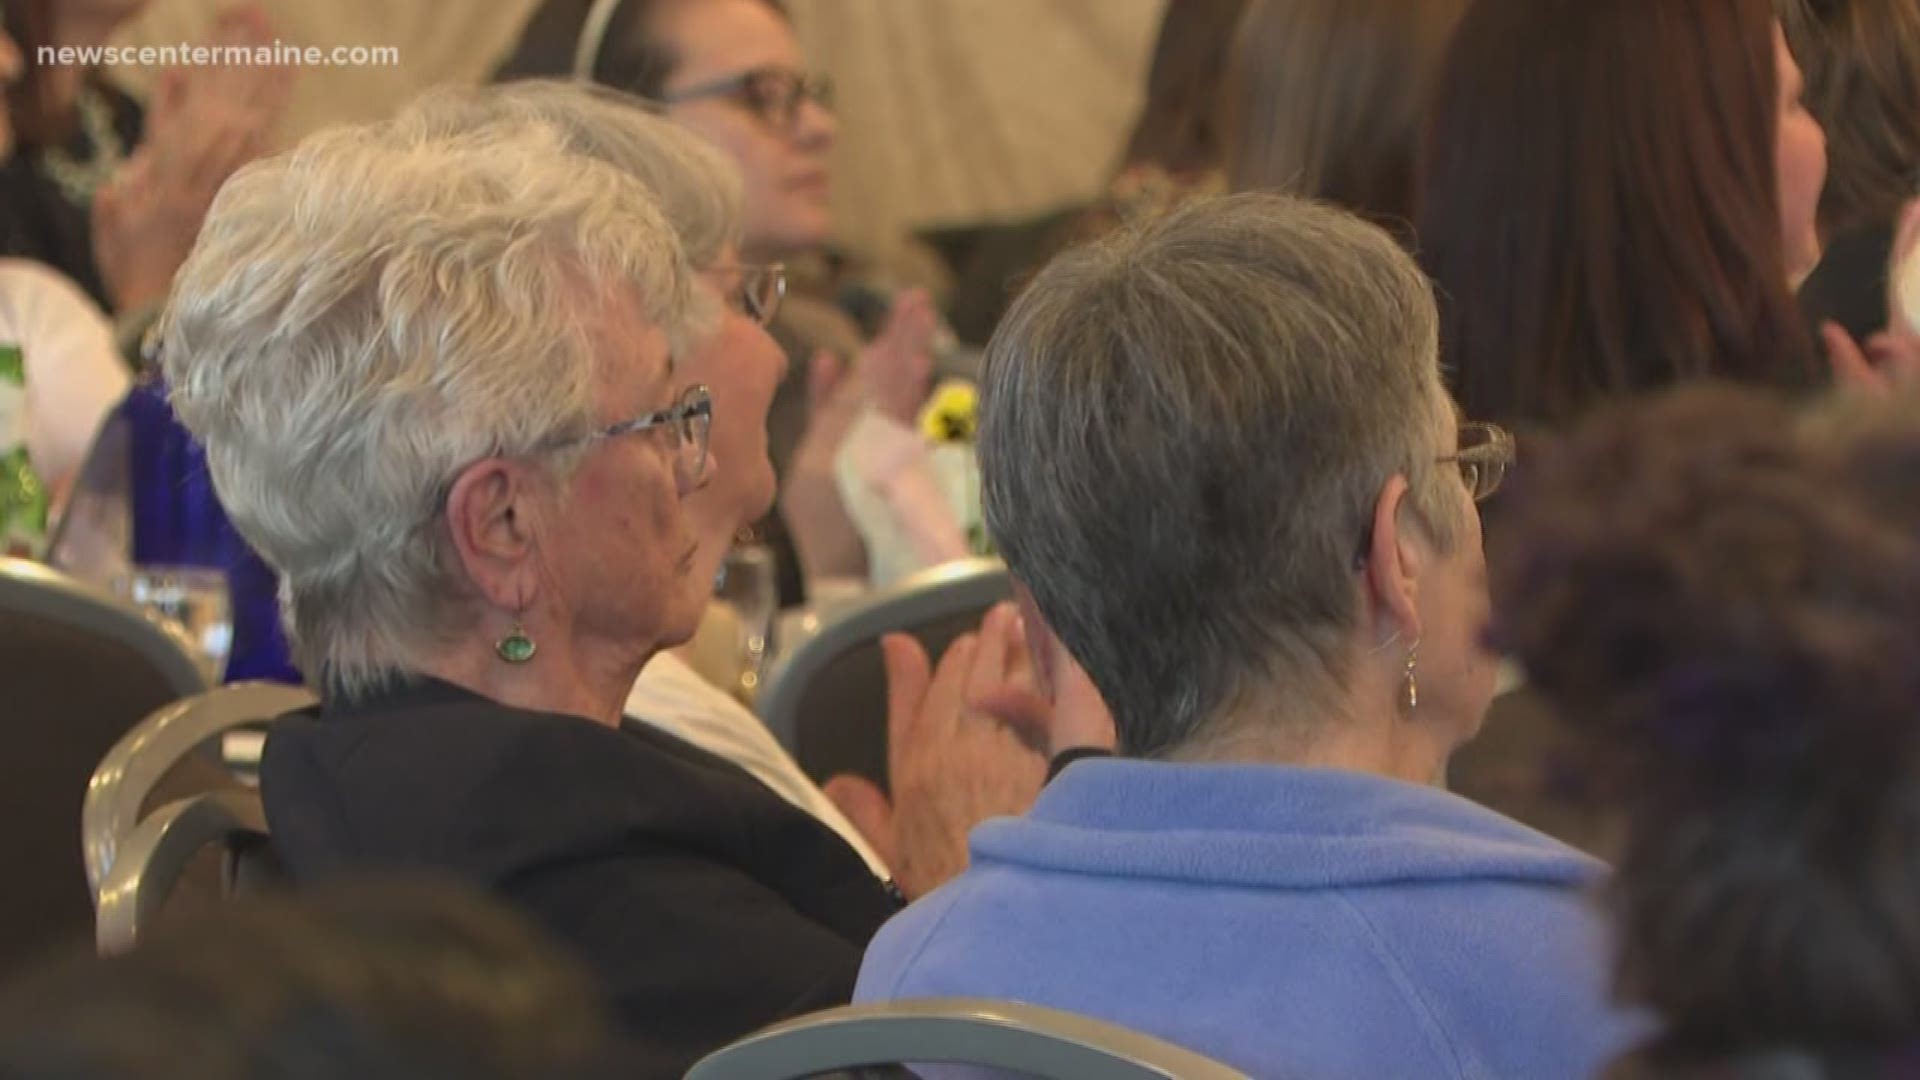 Hundreds of people came out Wednesday night to celebrate the achievements of New Beginnings, an organization that serves the homeless in Maine.